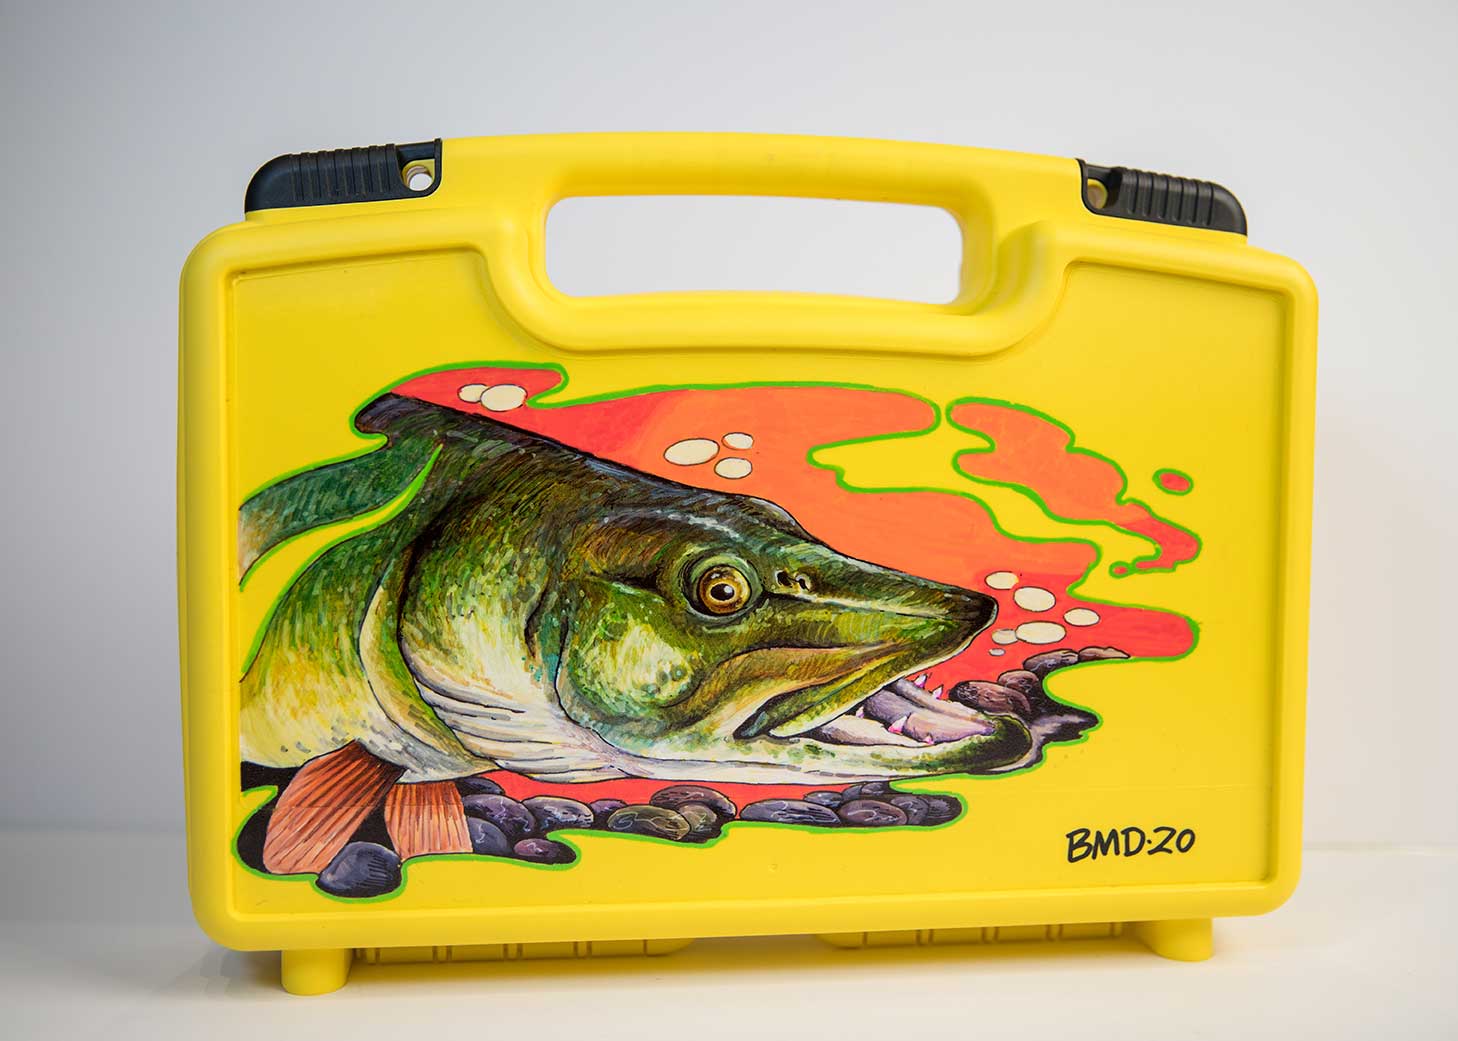 Big Cliff Box - Accessories - Chicago Fly Fishing Outfitters